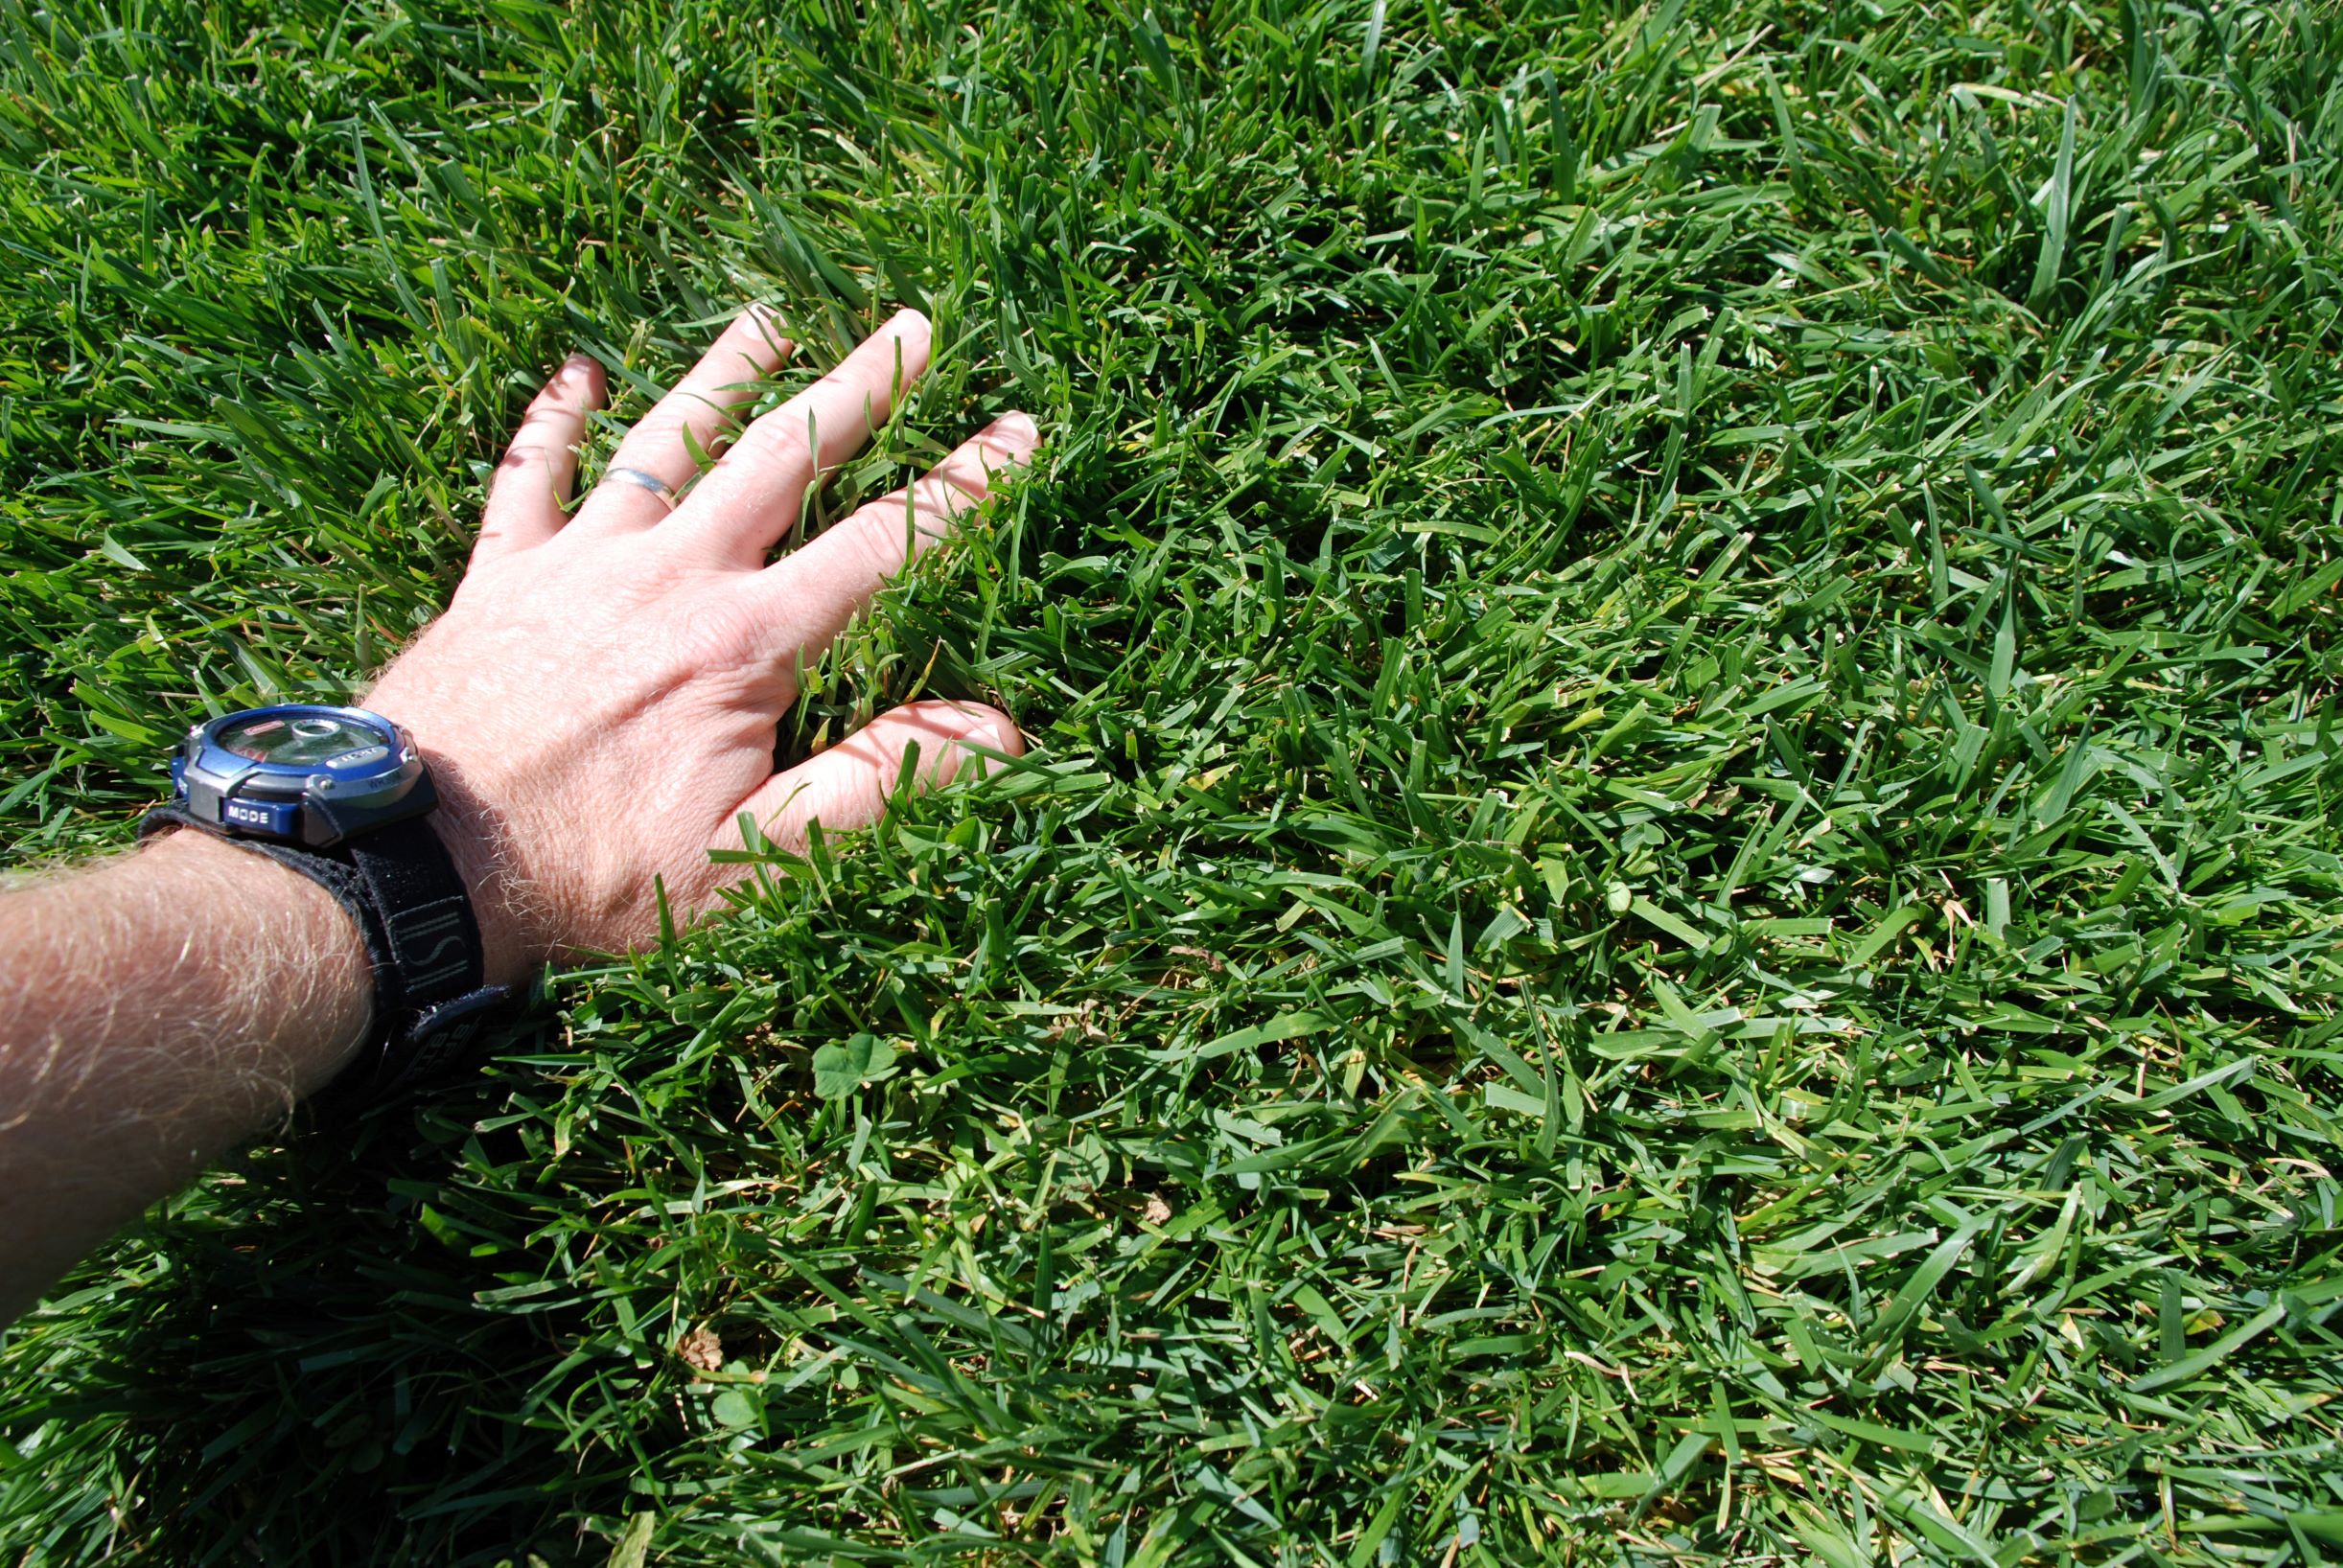 a person's hand touching a lawn consisting of tall fescue turfgrass